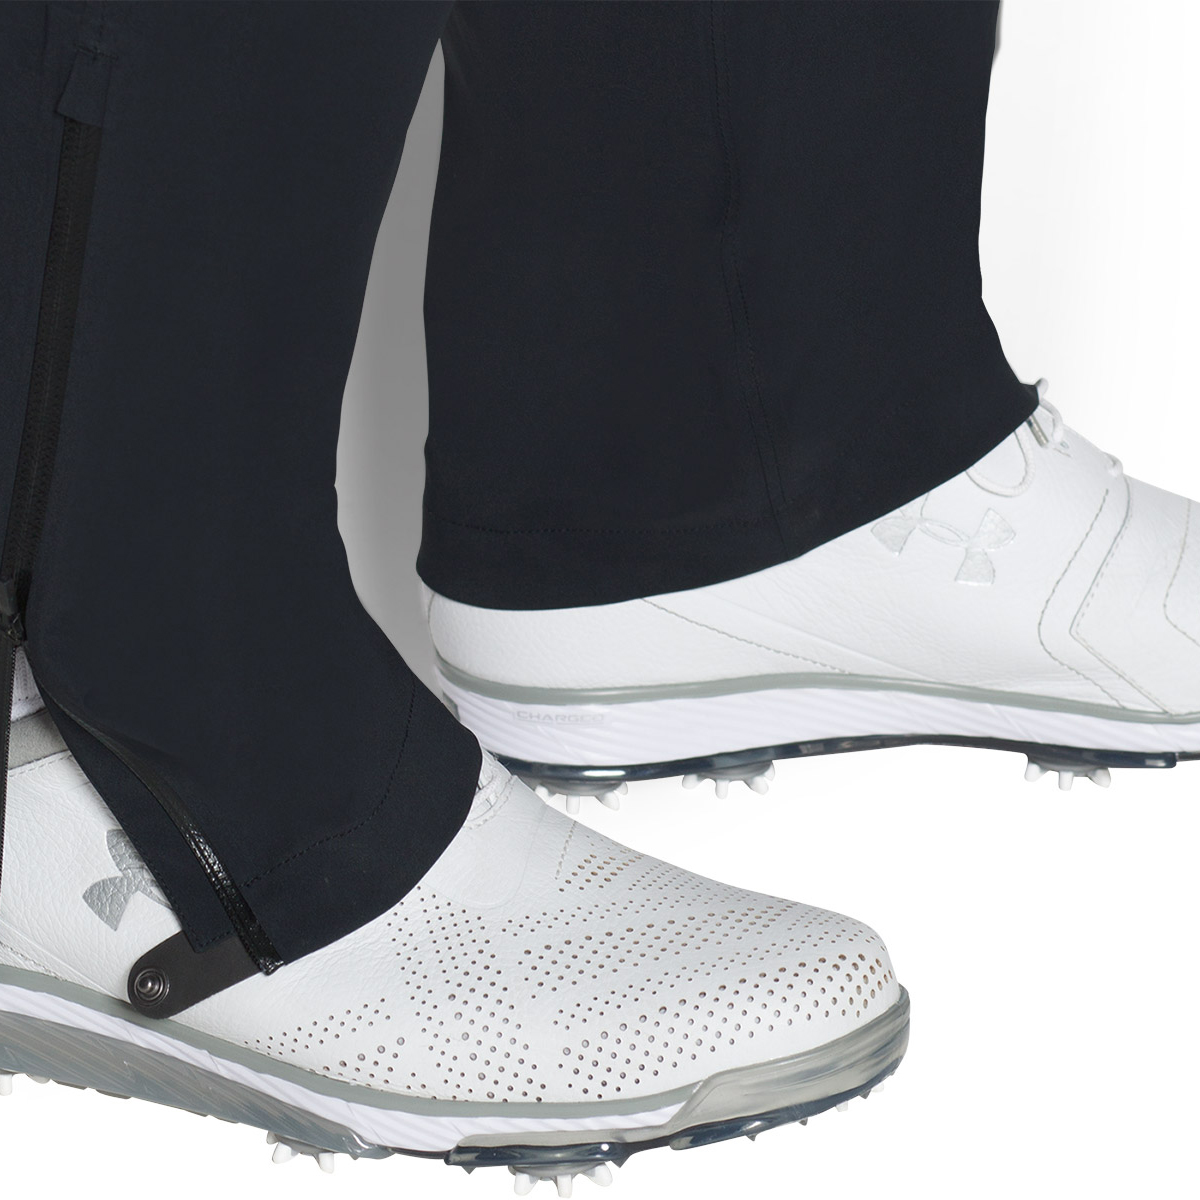 under armour gore tex golf trousers